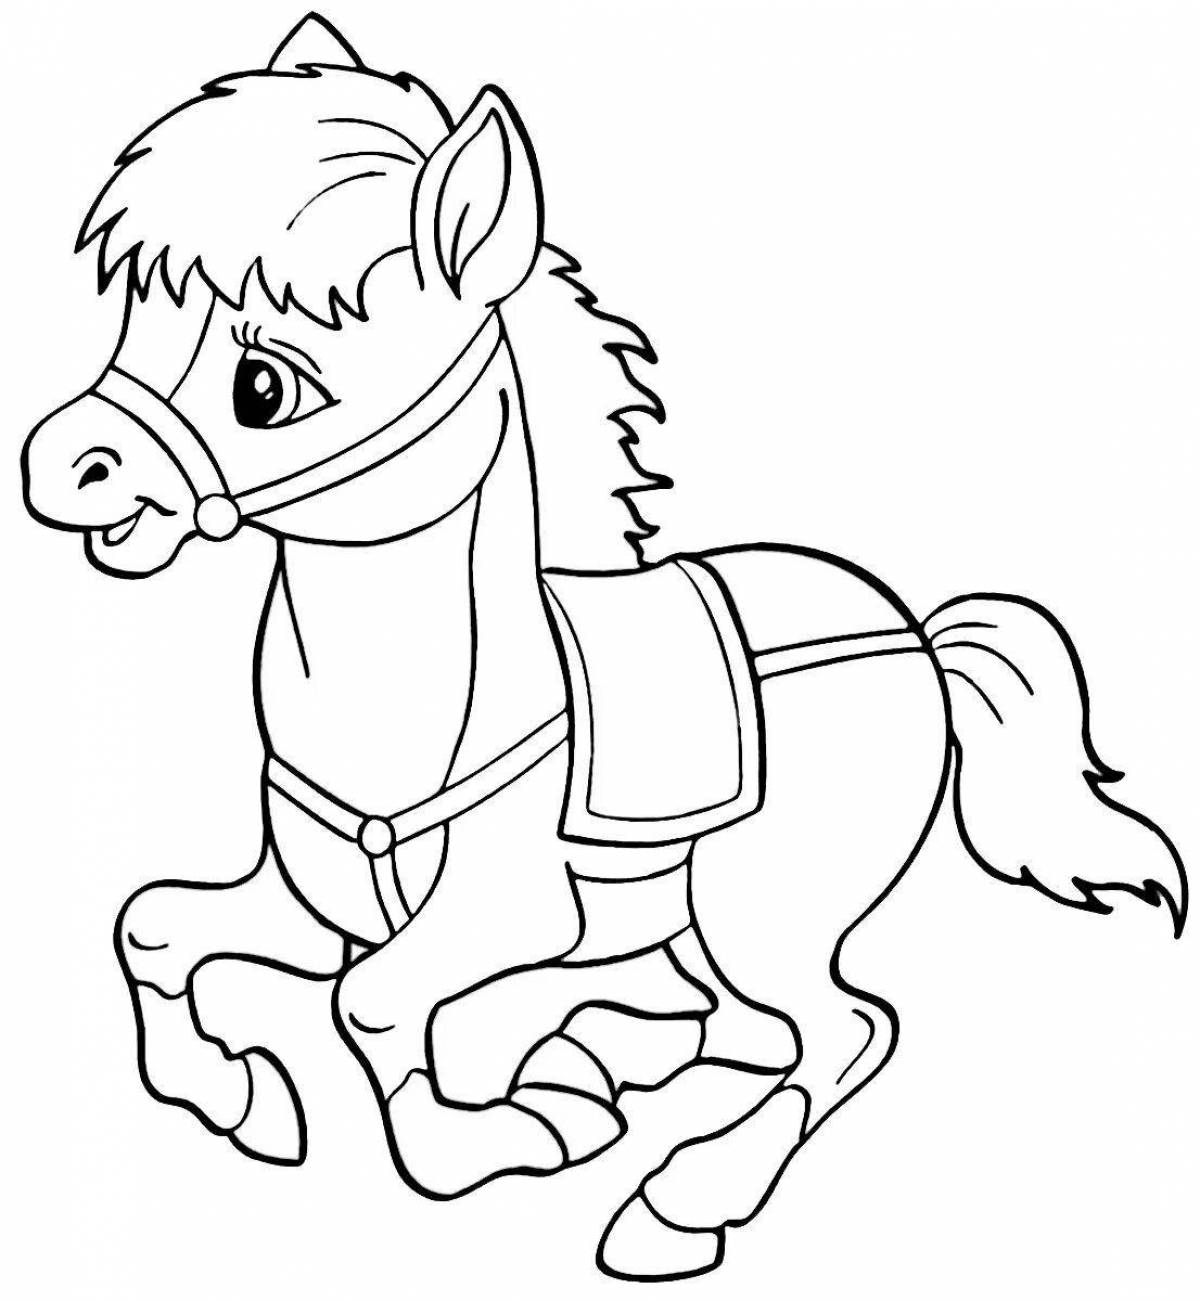 Radiant coloring horse for children 2-3 years old